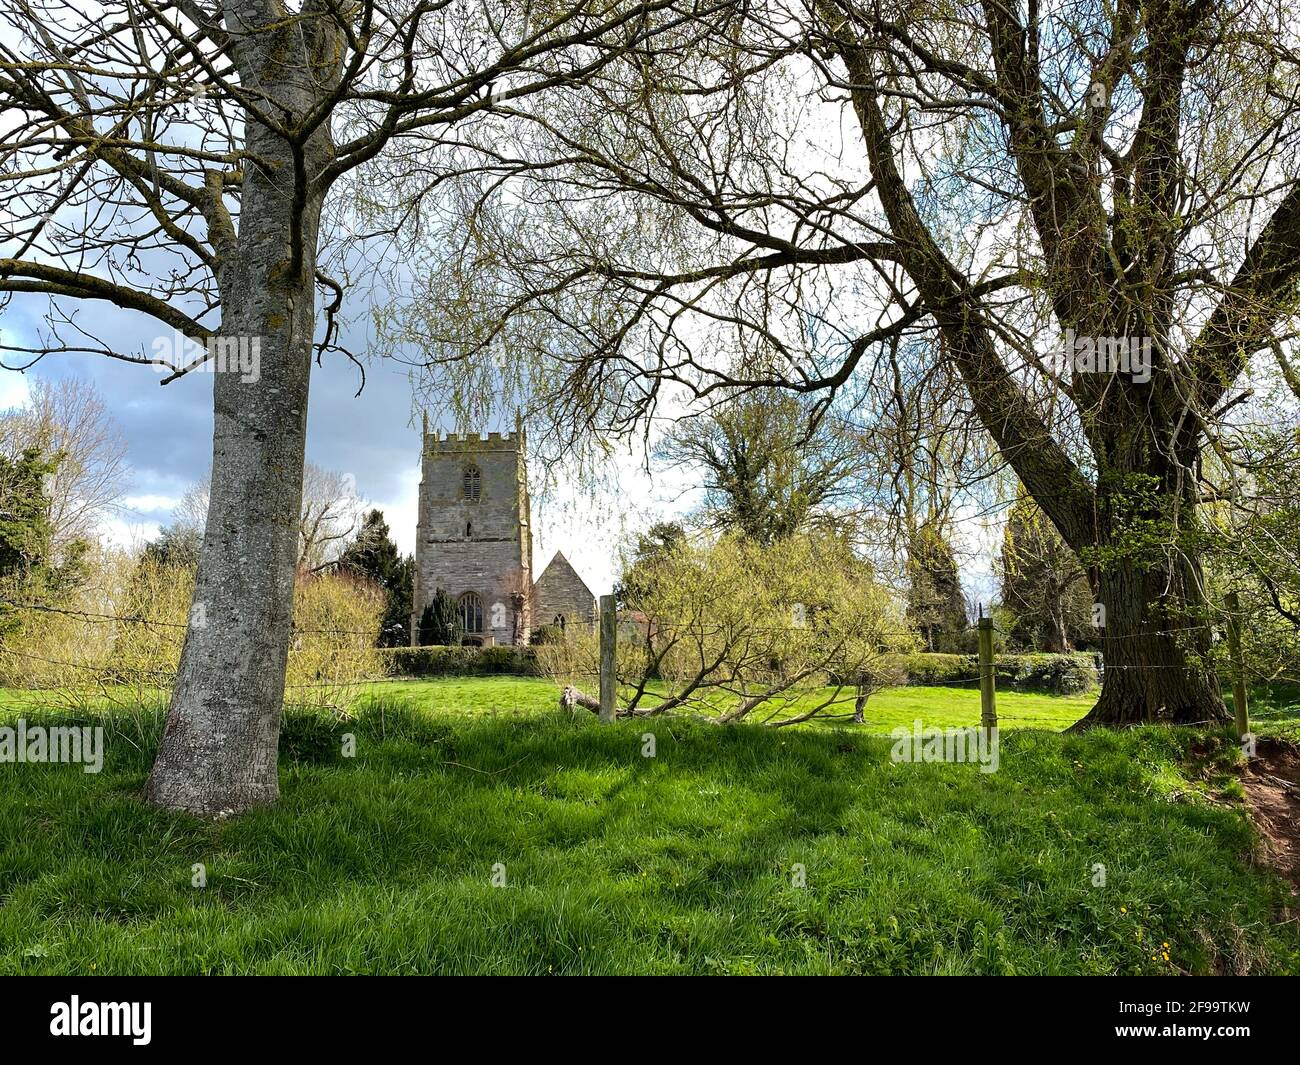 The Parish Church of St Mary in the rural countryside of Warwickshire in village of Studley, ENgland, UK. Stock Photo